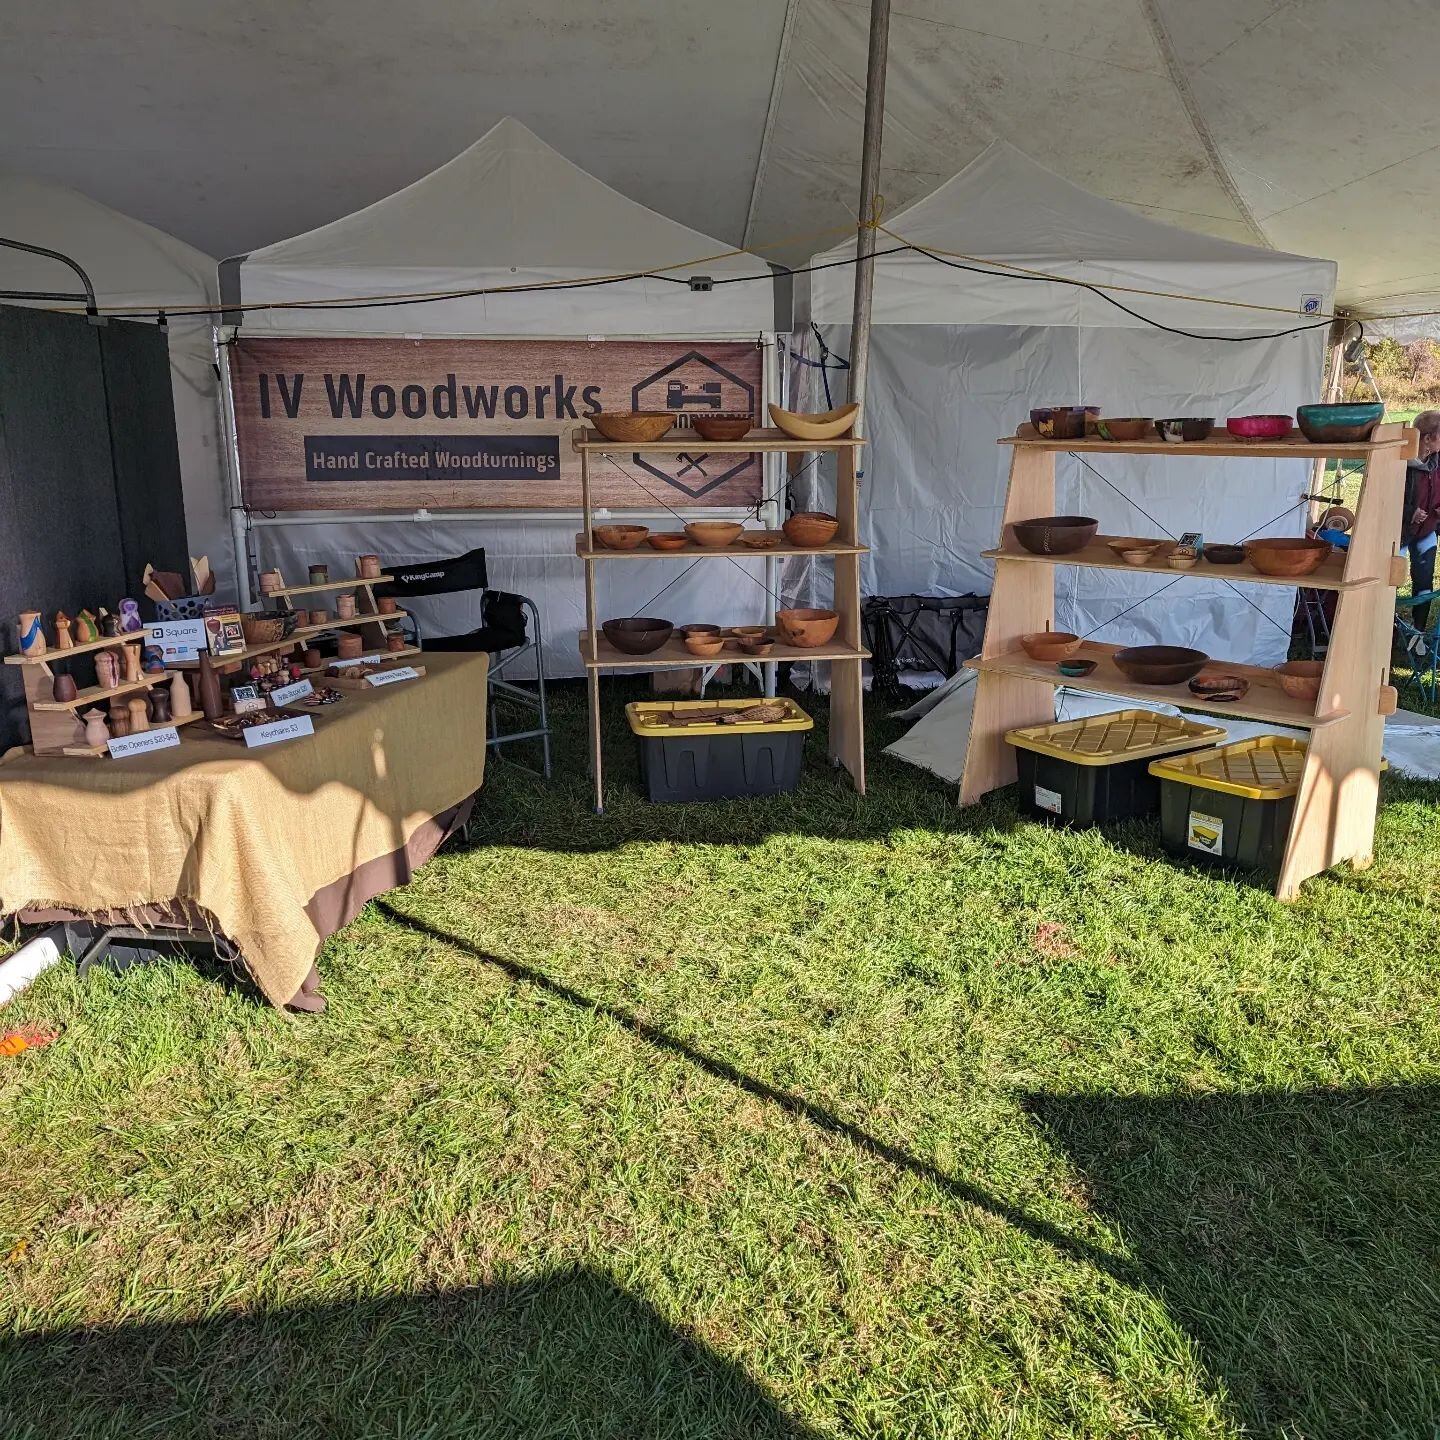 Tyler Park Crafts in the Meadow

Hey everyone, day two has begun. The weather is so much nicer today, bright and sunny with no rain in sight. Come on out and say hi. Lots of cool vendors and fun for everyone even if you're not shopping. 

#craftsinth